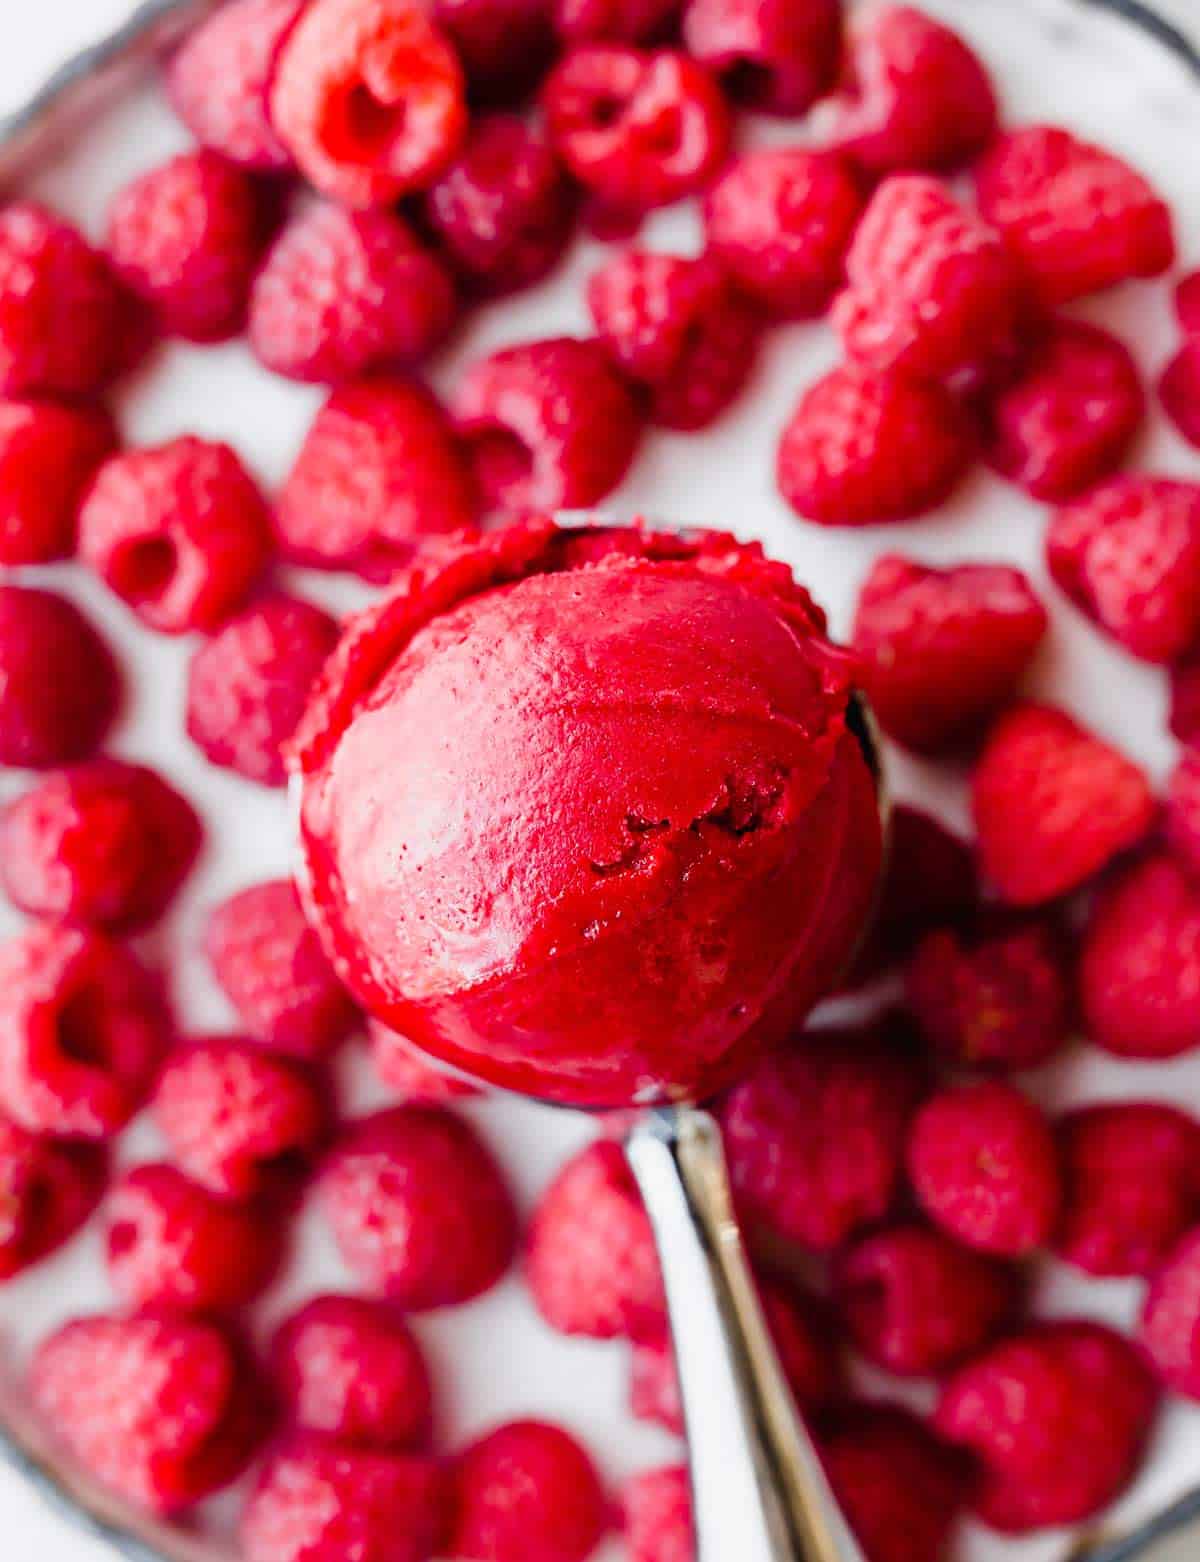 An ice cream scoop with a scoop of red Raspberry Sorbet that has been churned, above a bed of fresh raspberries.